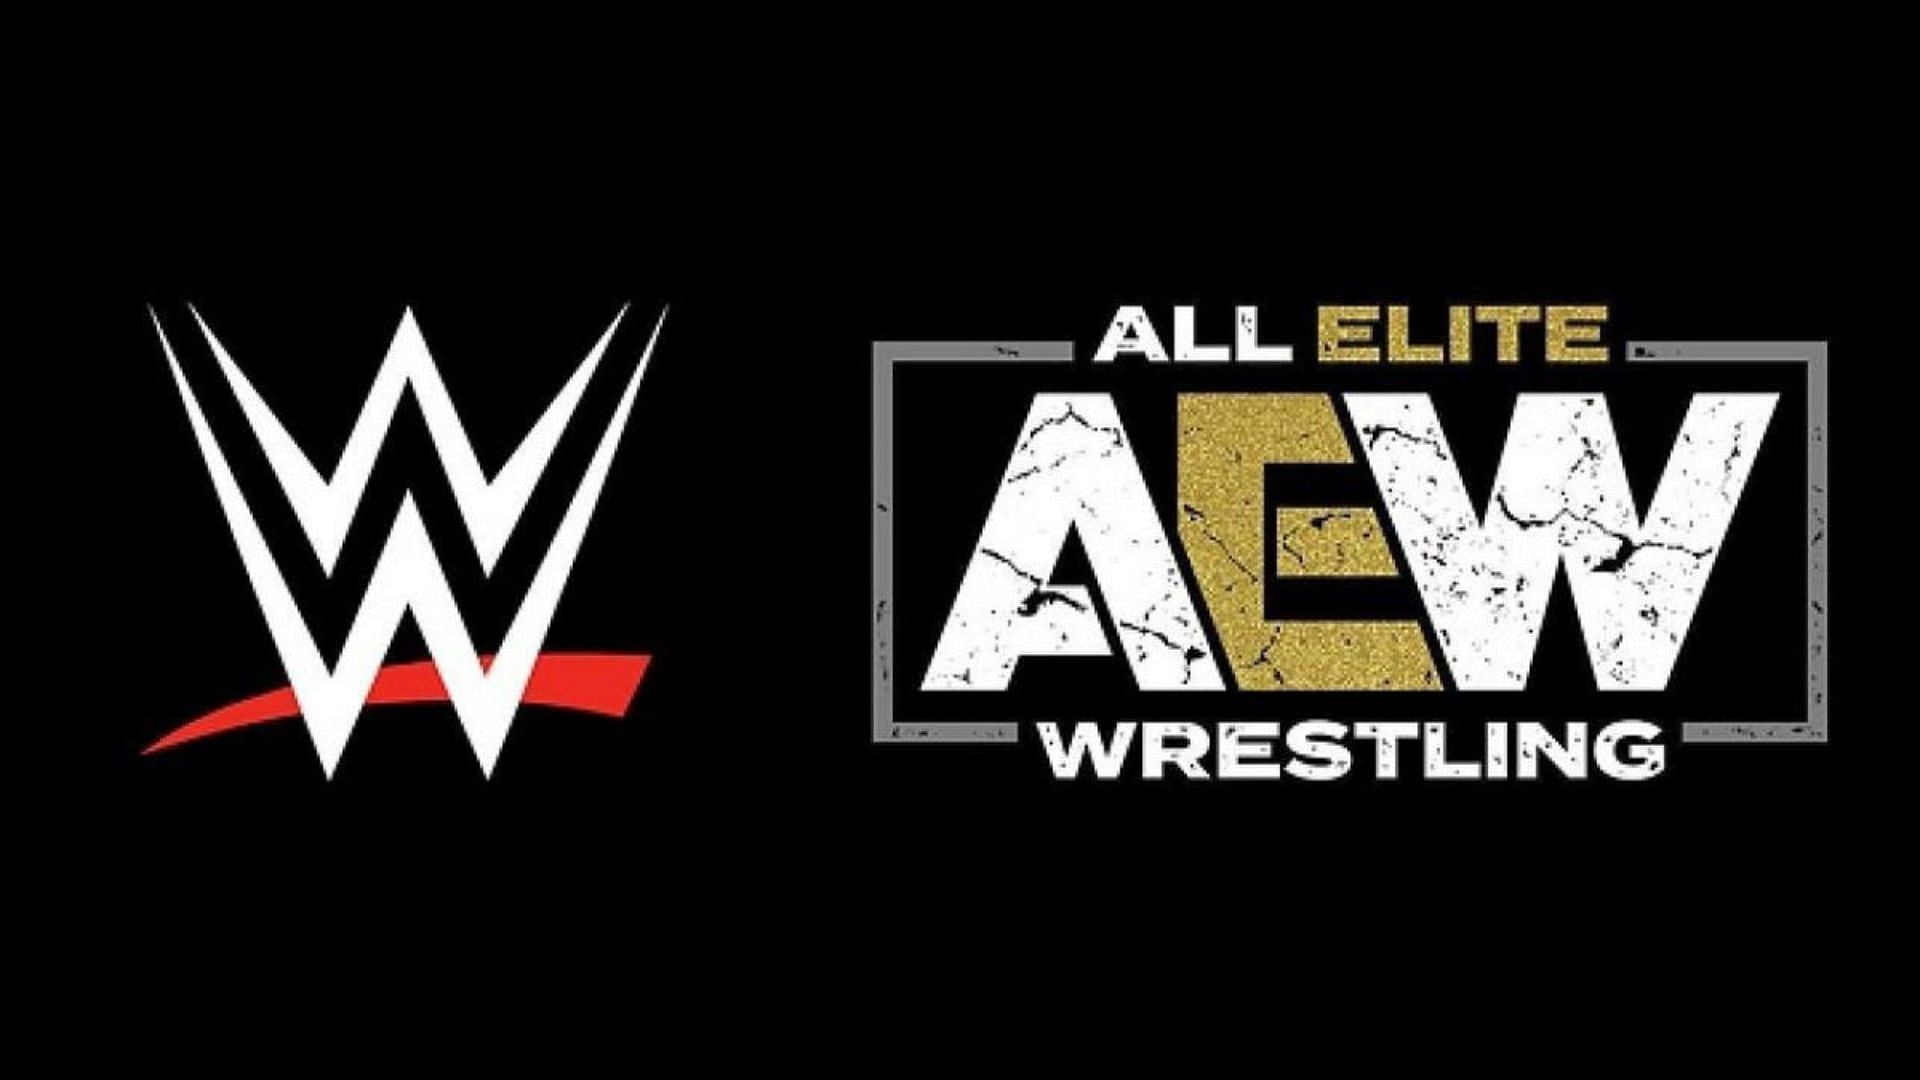 WWE and AEW are the two biggest wrestling promotion in the world